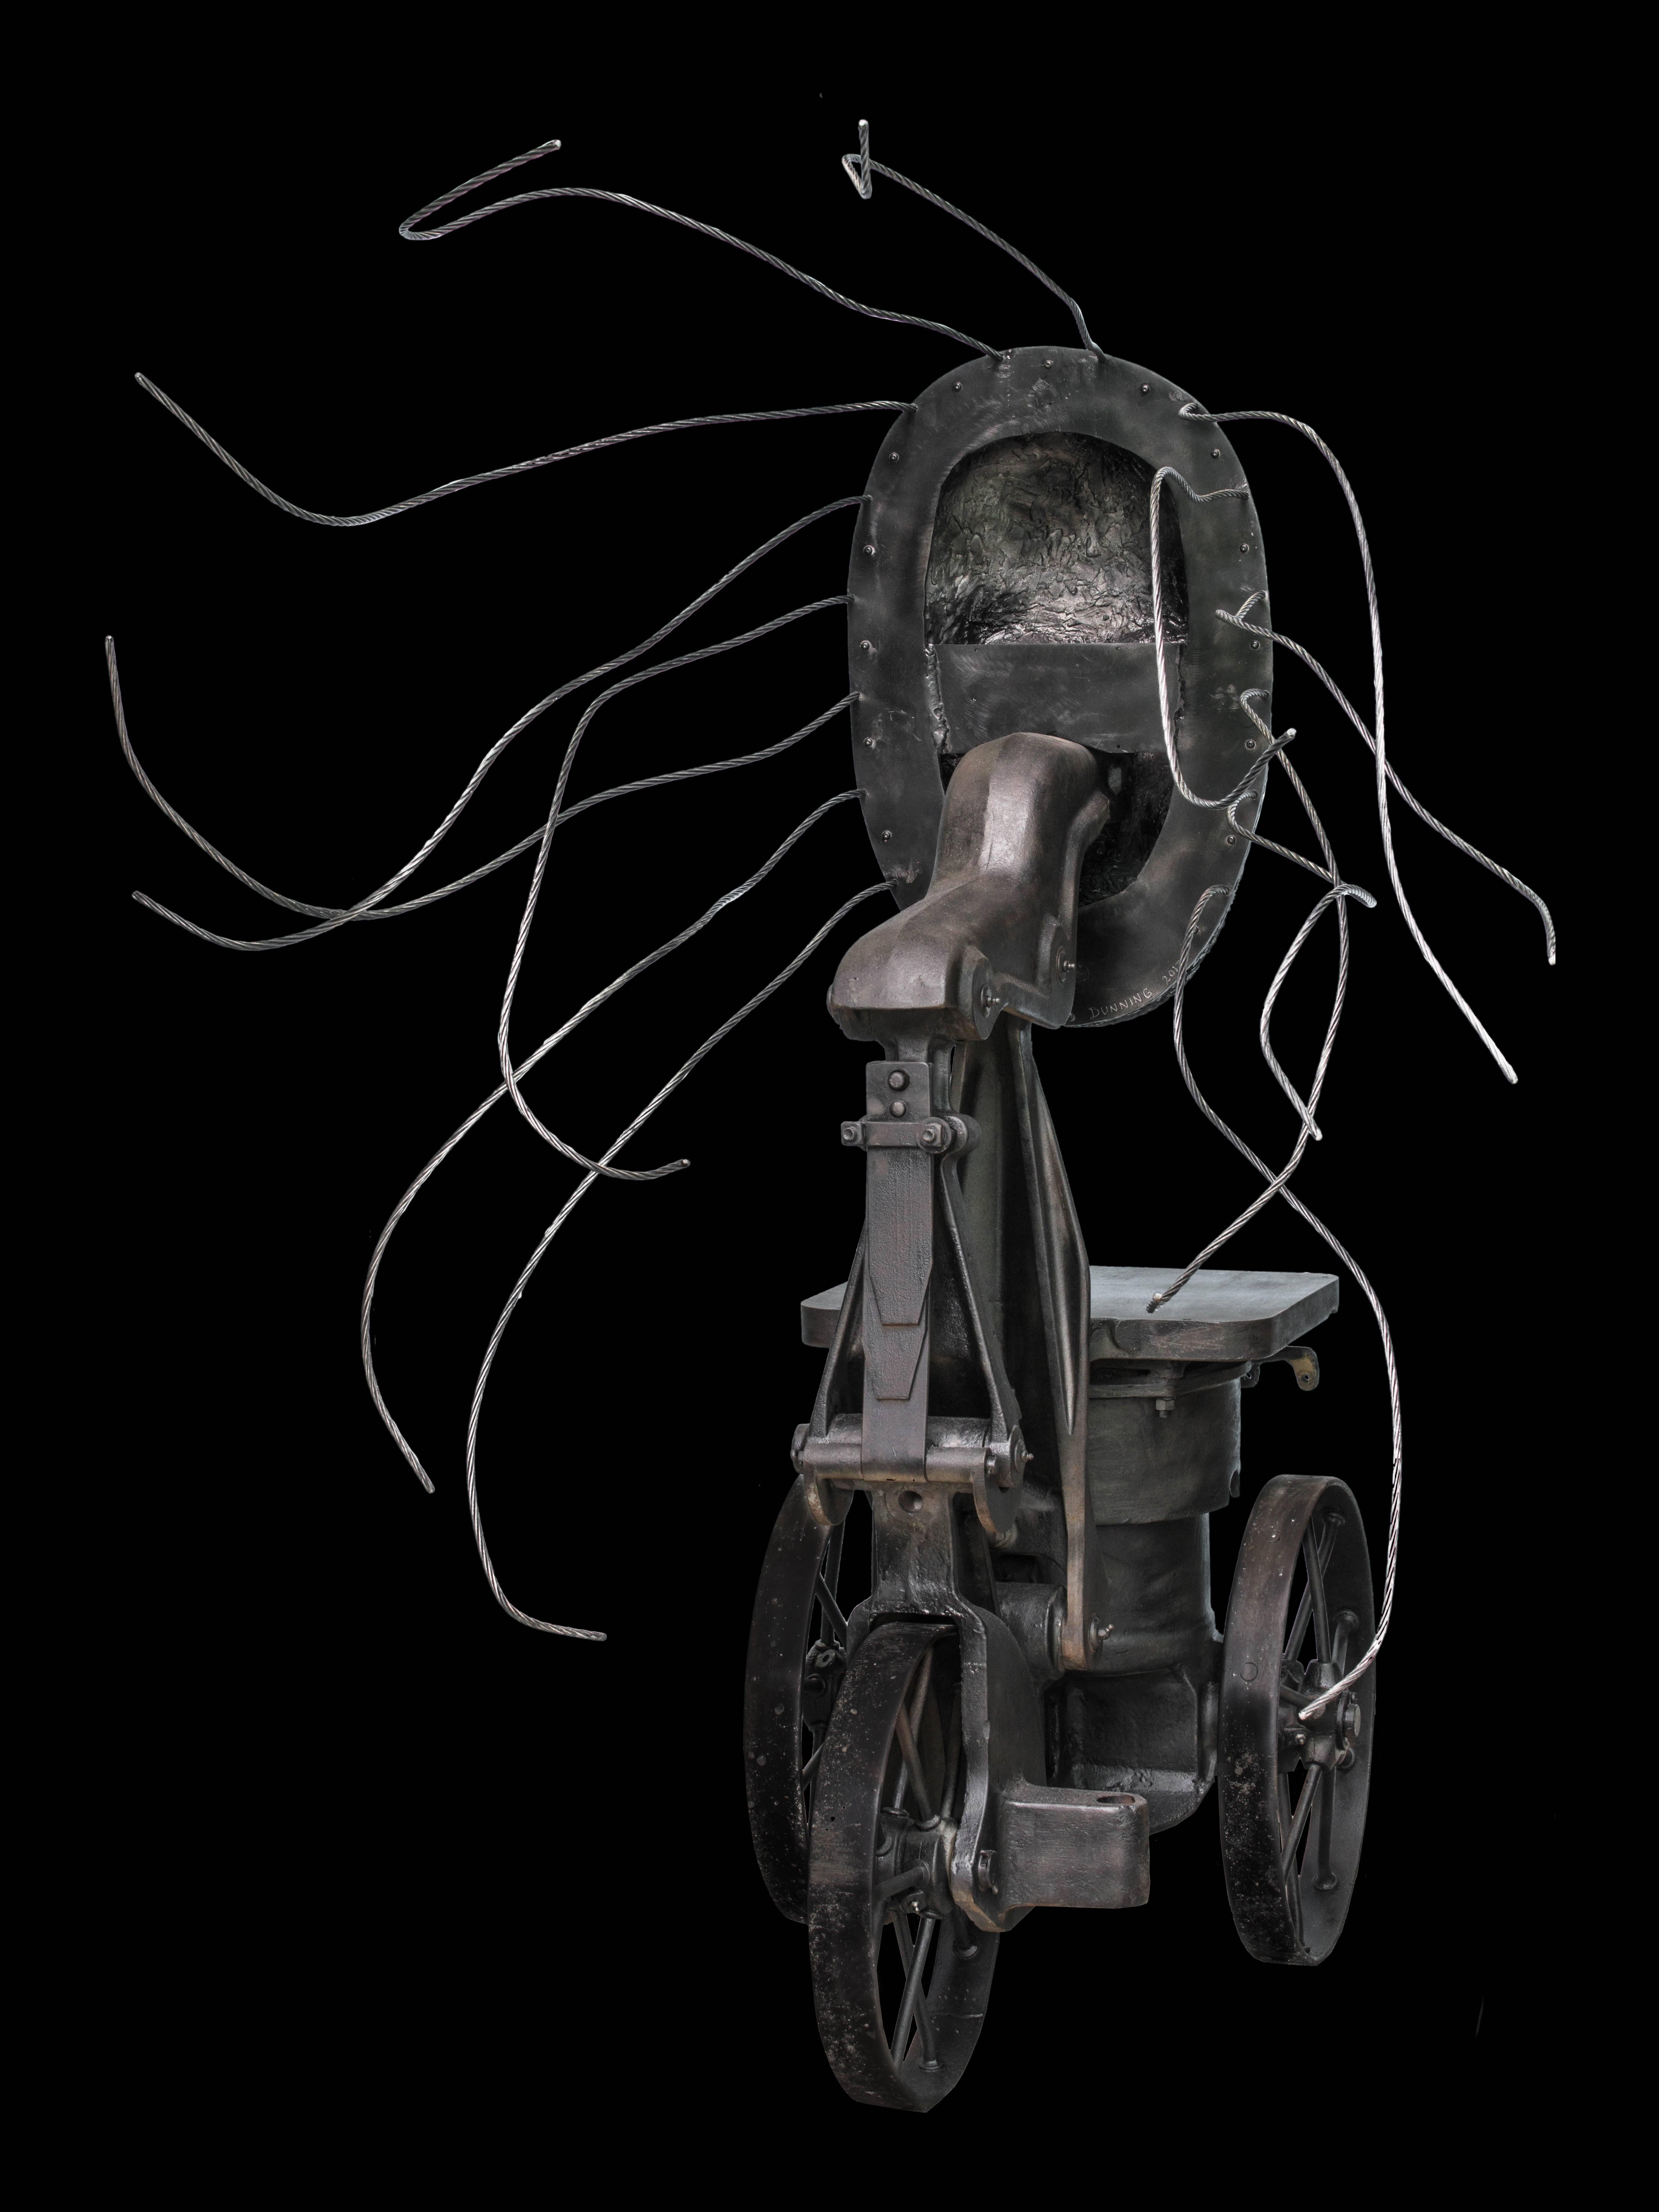 Press - tall, steam-punk inspired, human face, lead, aluminum and iron sculpture - Black Abstract Sculpture by Dale Dunning